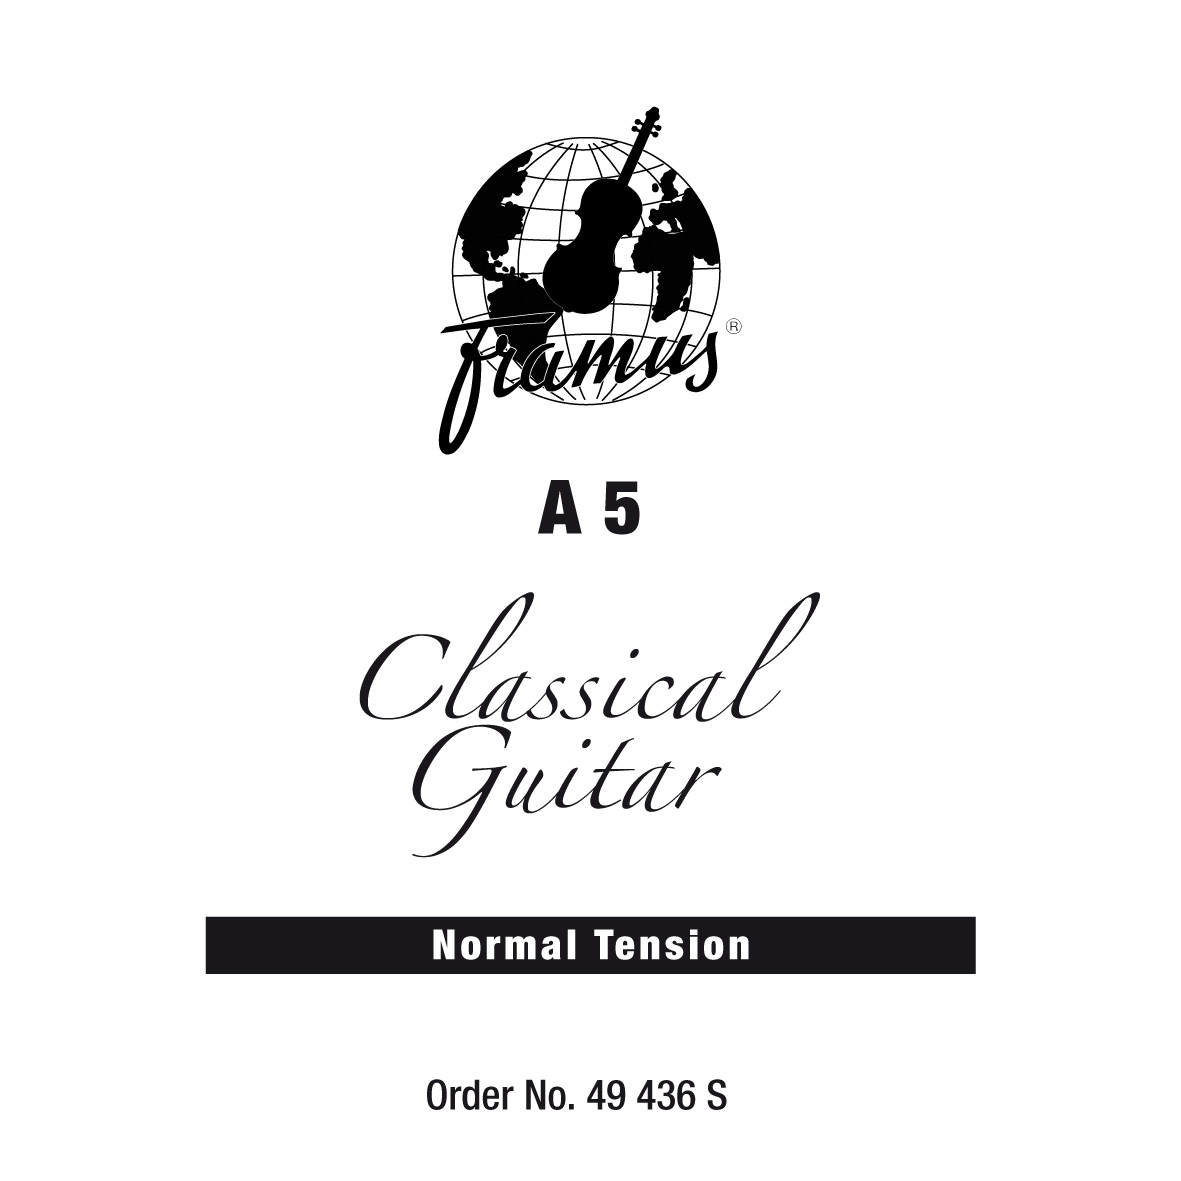 Framus Classic - Classical Guitar Single String, A 5, .035, wound, Normal Tension